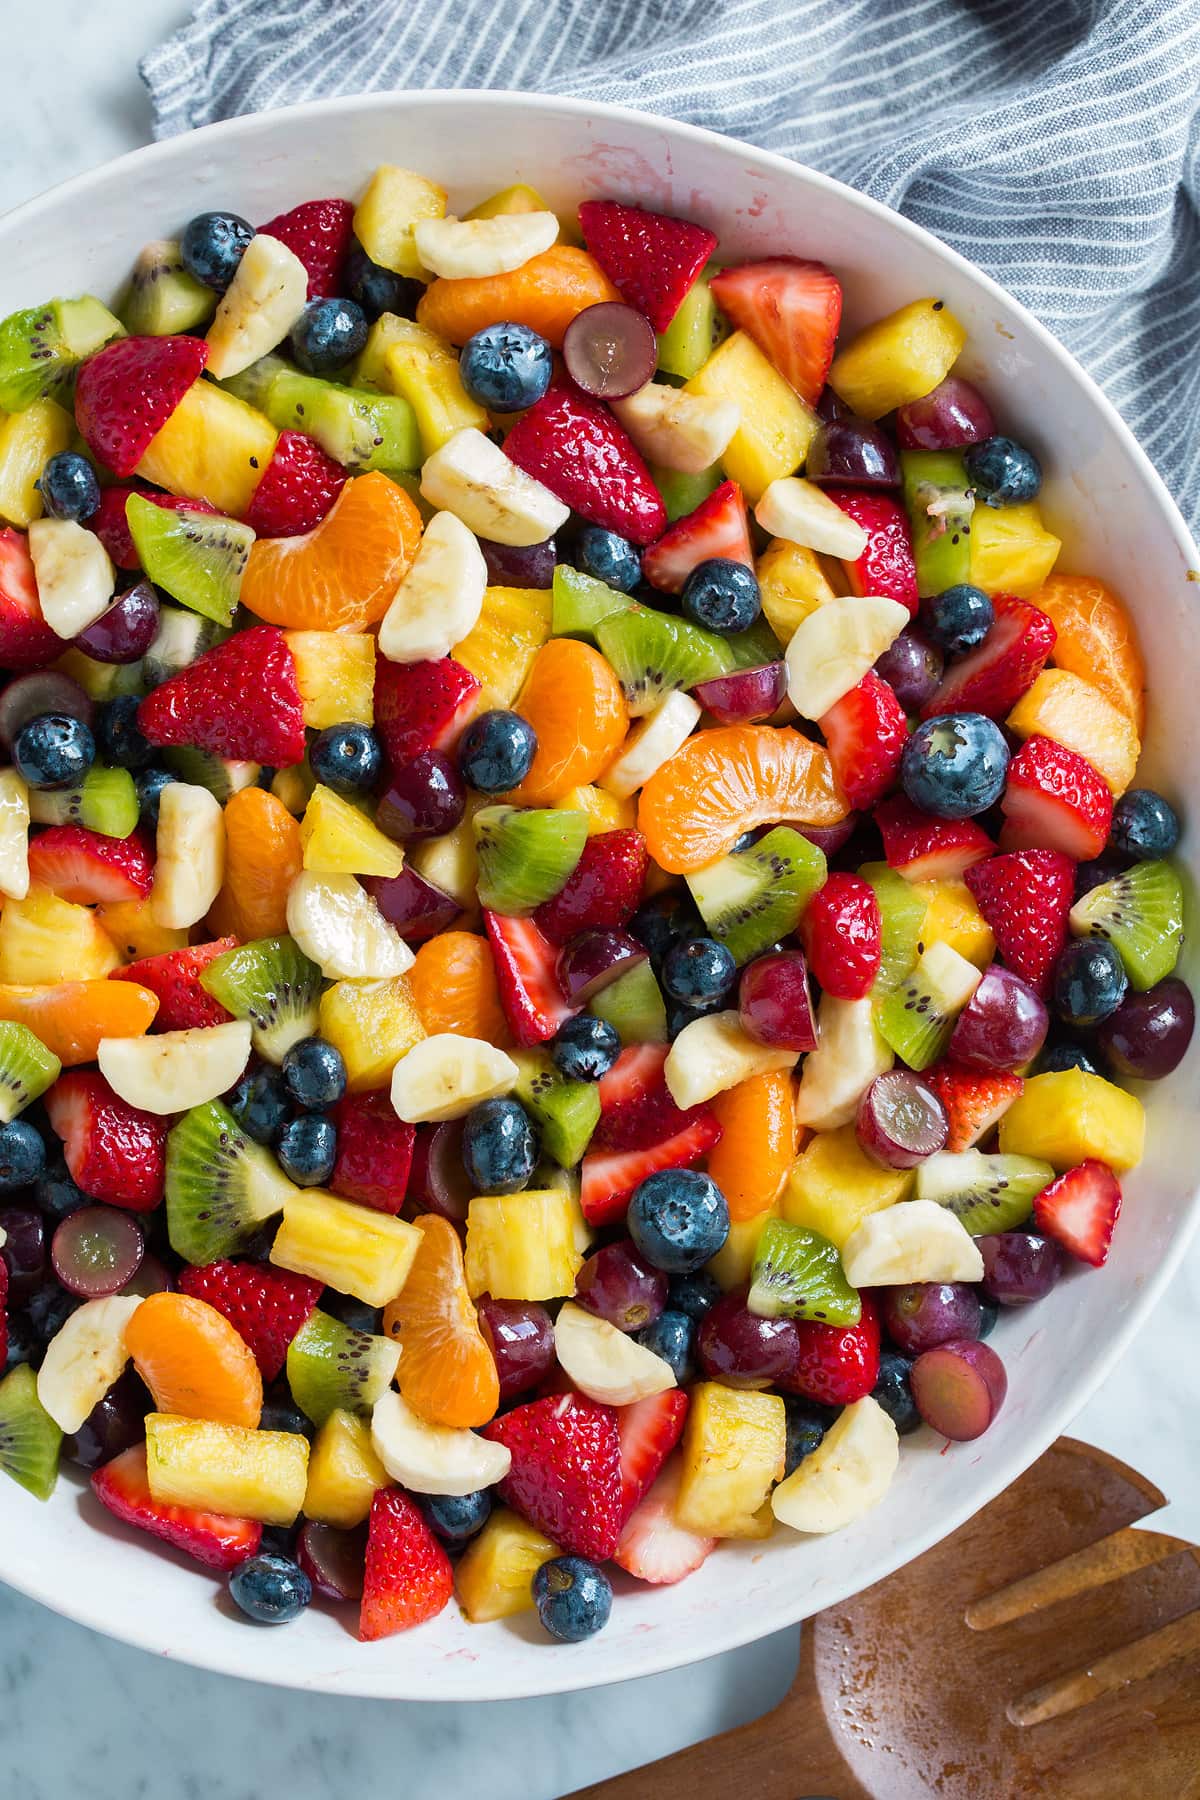 Fruit Salad with rainbow of colors in a large white serving bowl.